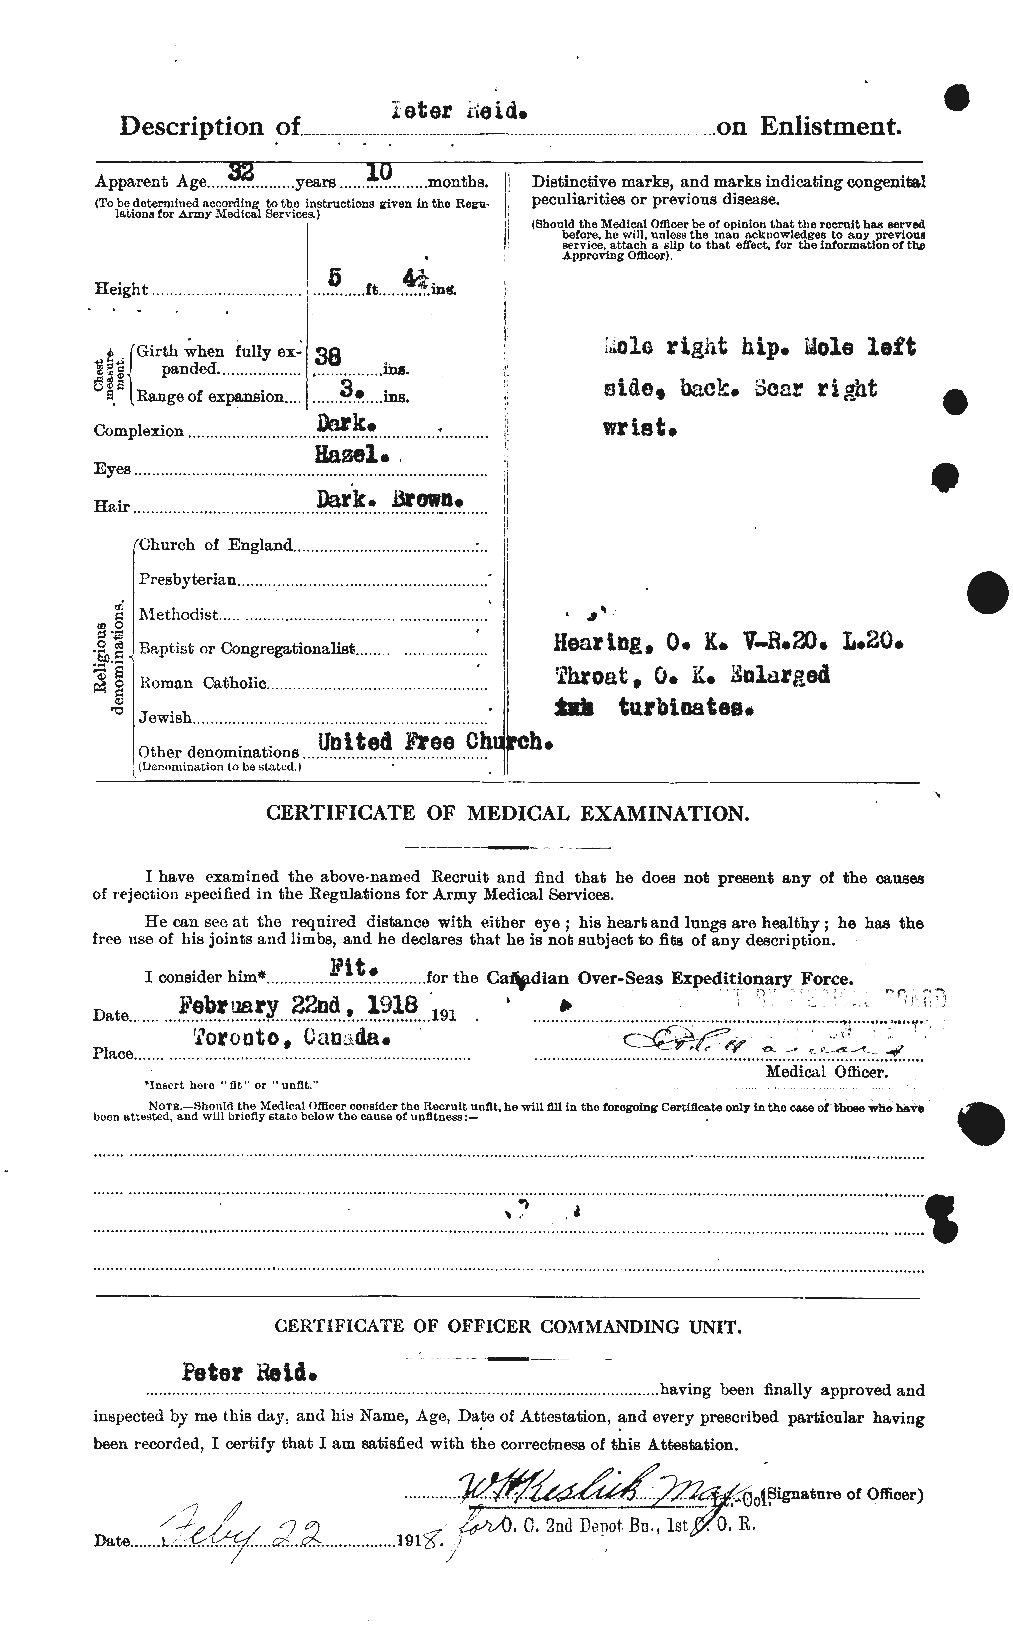 Personnel Records of the First World War - CEF 601837b